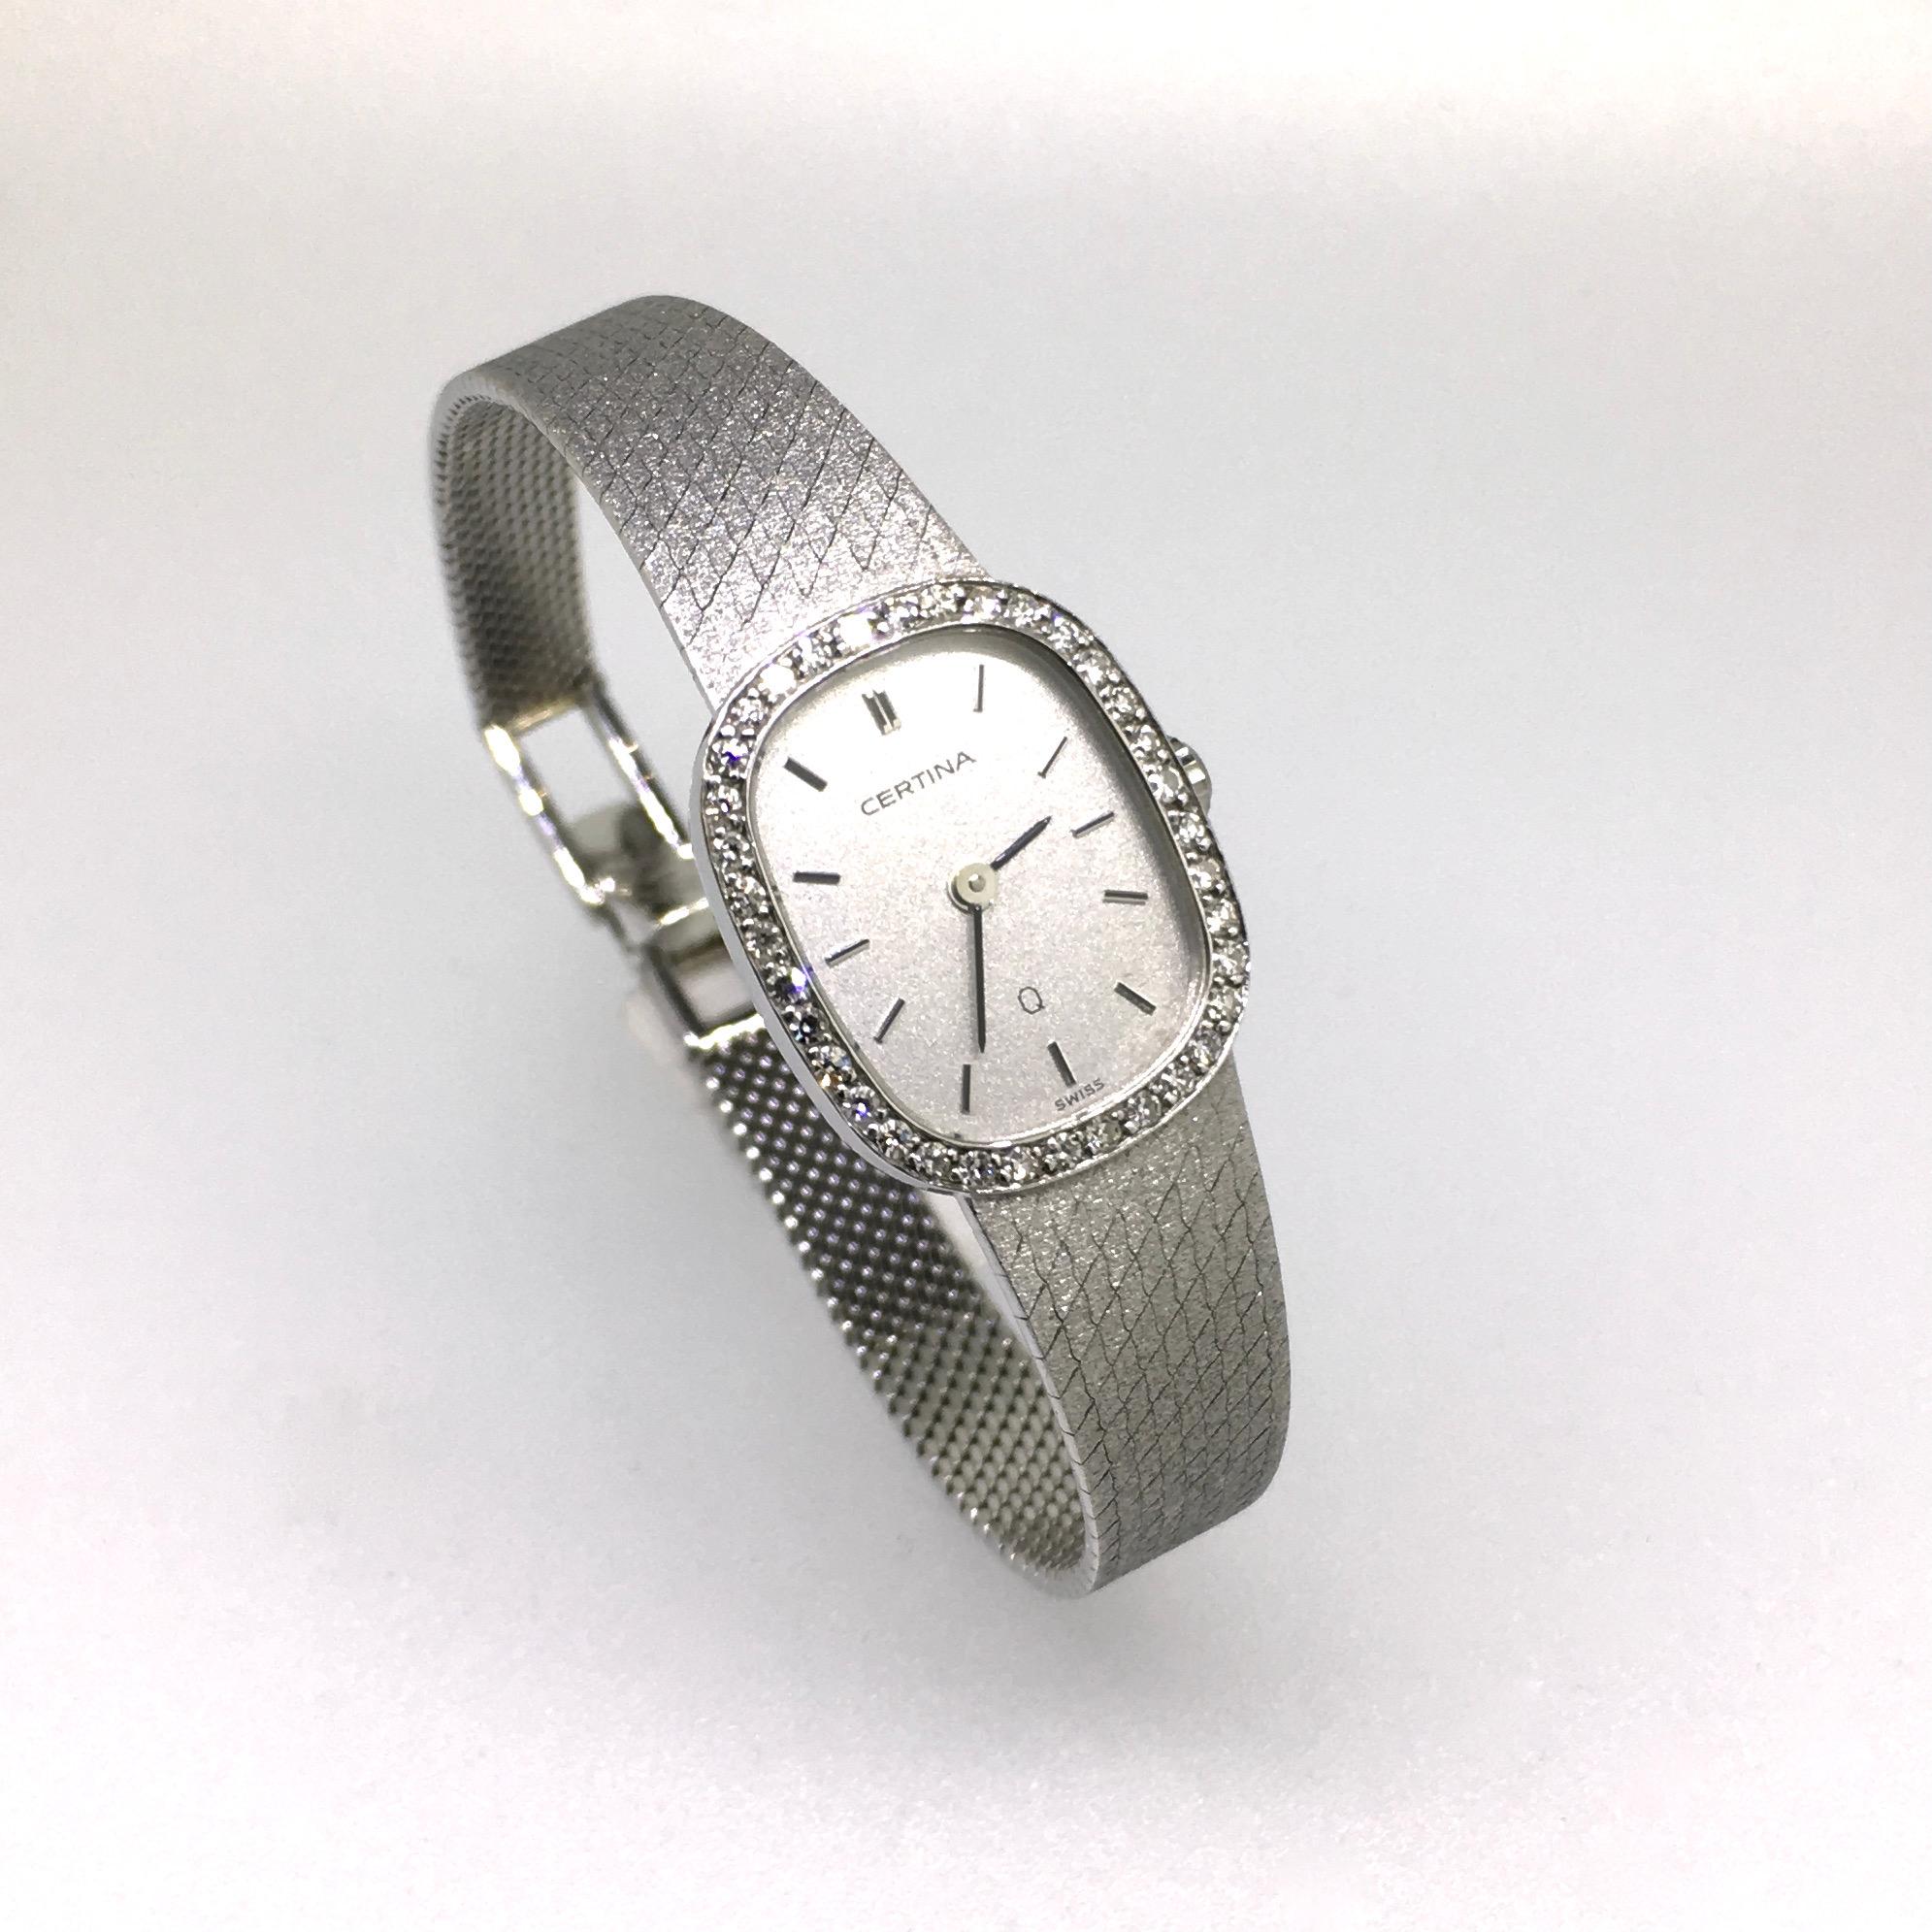 Watch, 18 carat White Gold, set with 36 round cut Diamonds, Certina, Vintage, 1983. Close to Oval shaped case, 18 carat white gold case and bracelet. 18 carat hallmarks. The first collection with very slim Swiss Quartz movement. This watch in